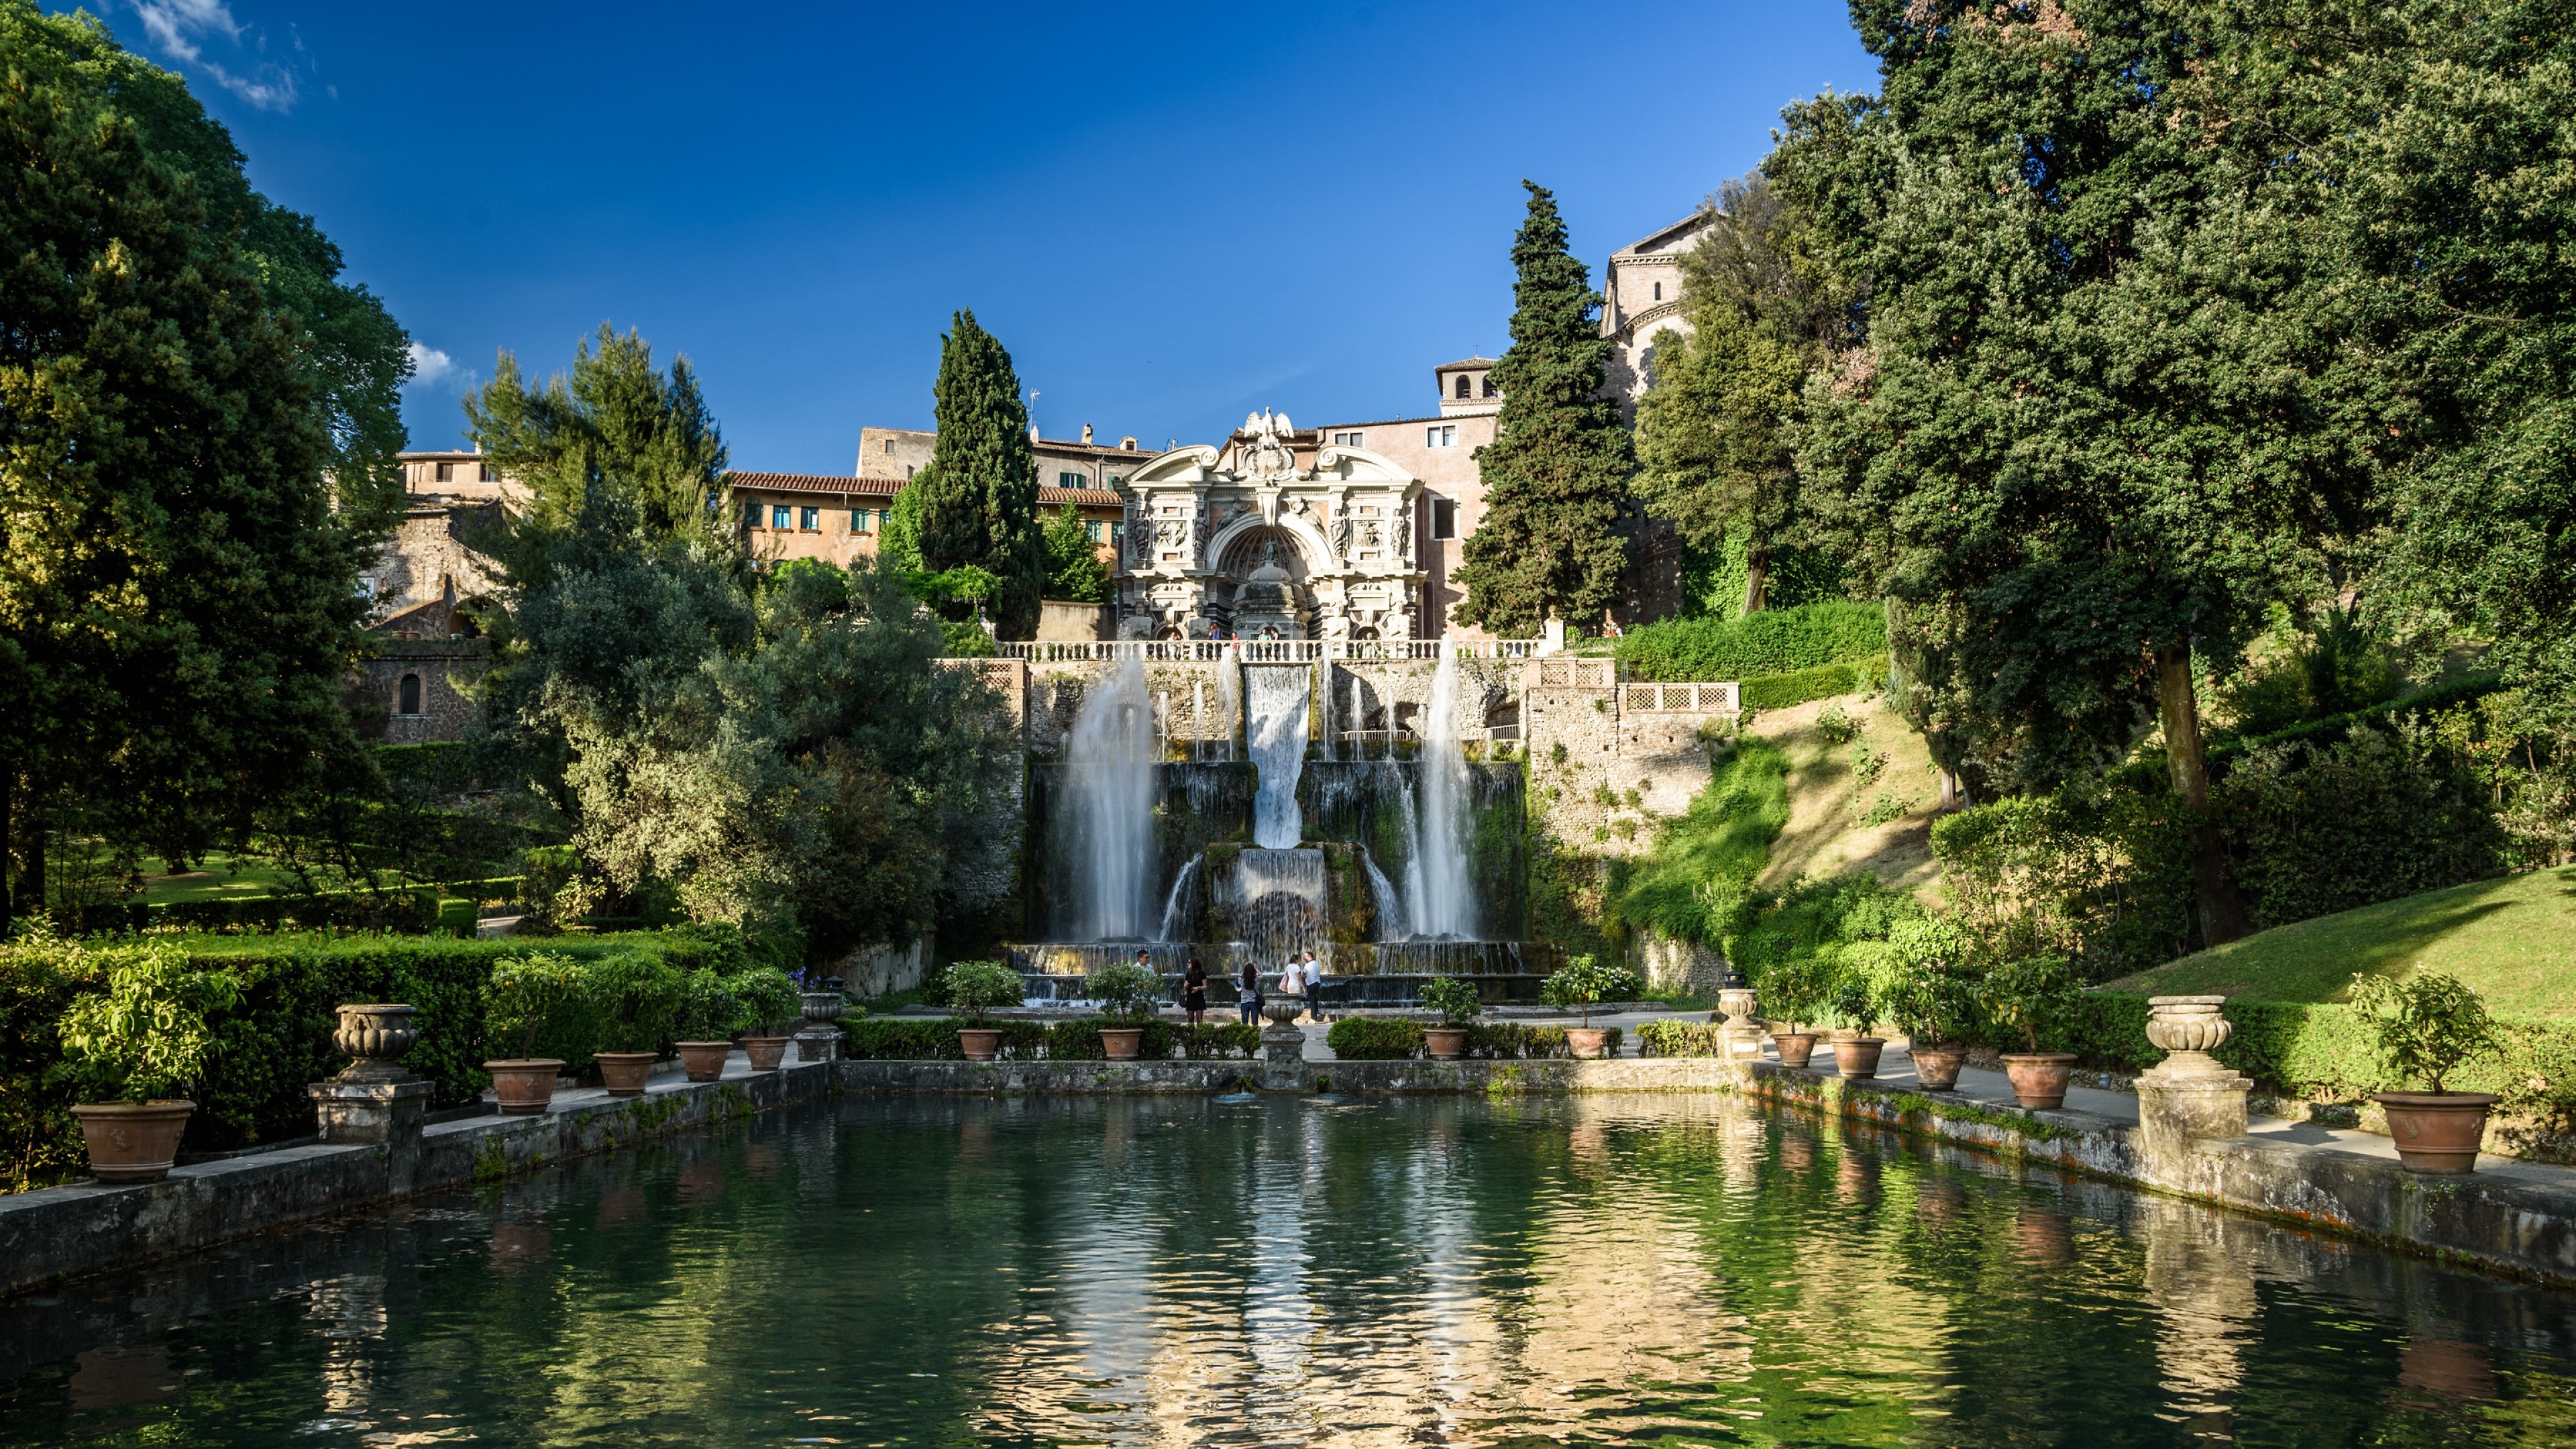 General 3840x2160 Villa d'este Italy nature water trees waterfall building